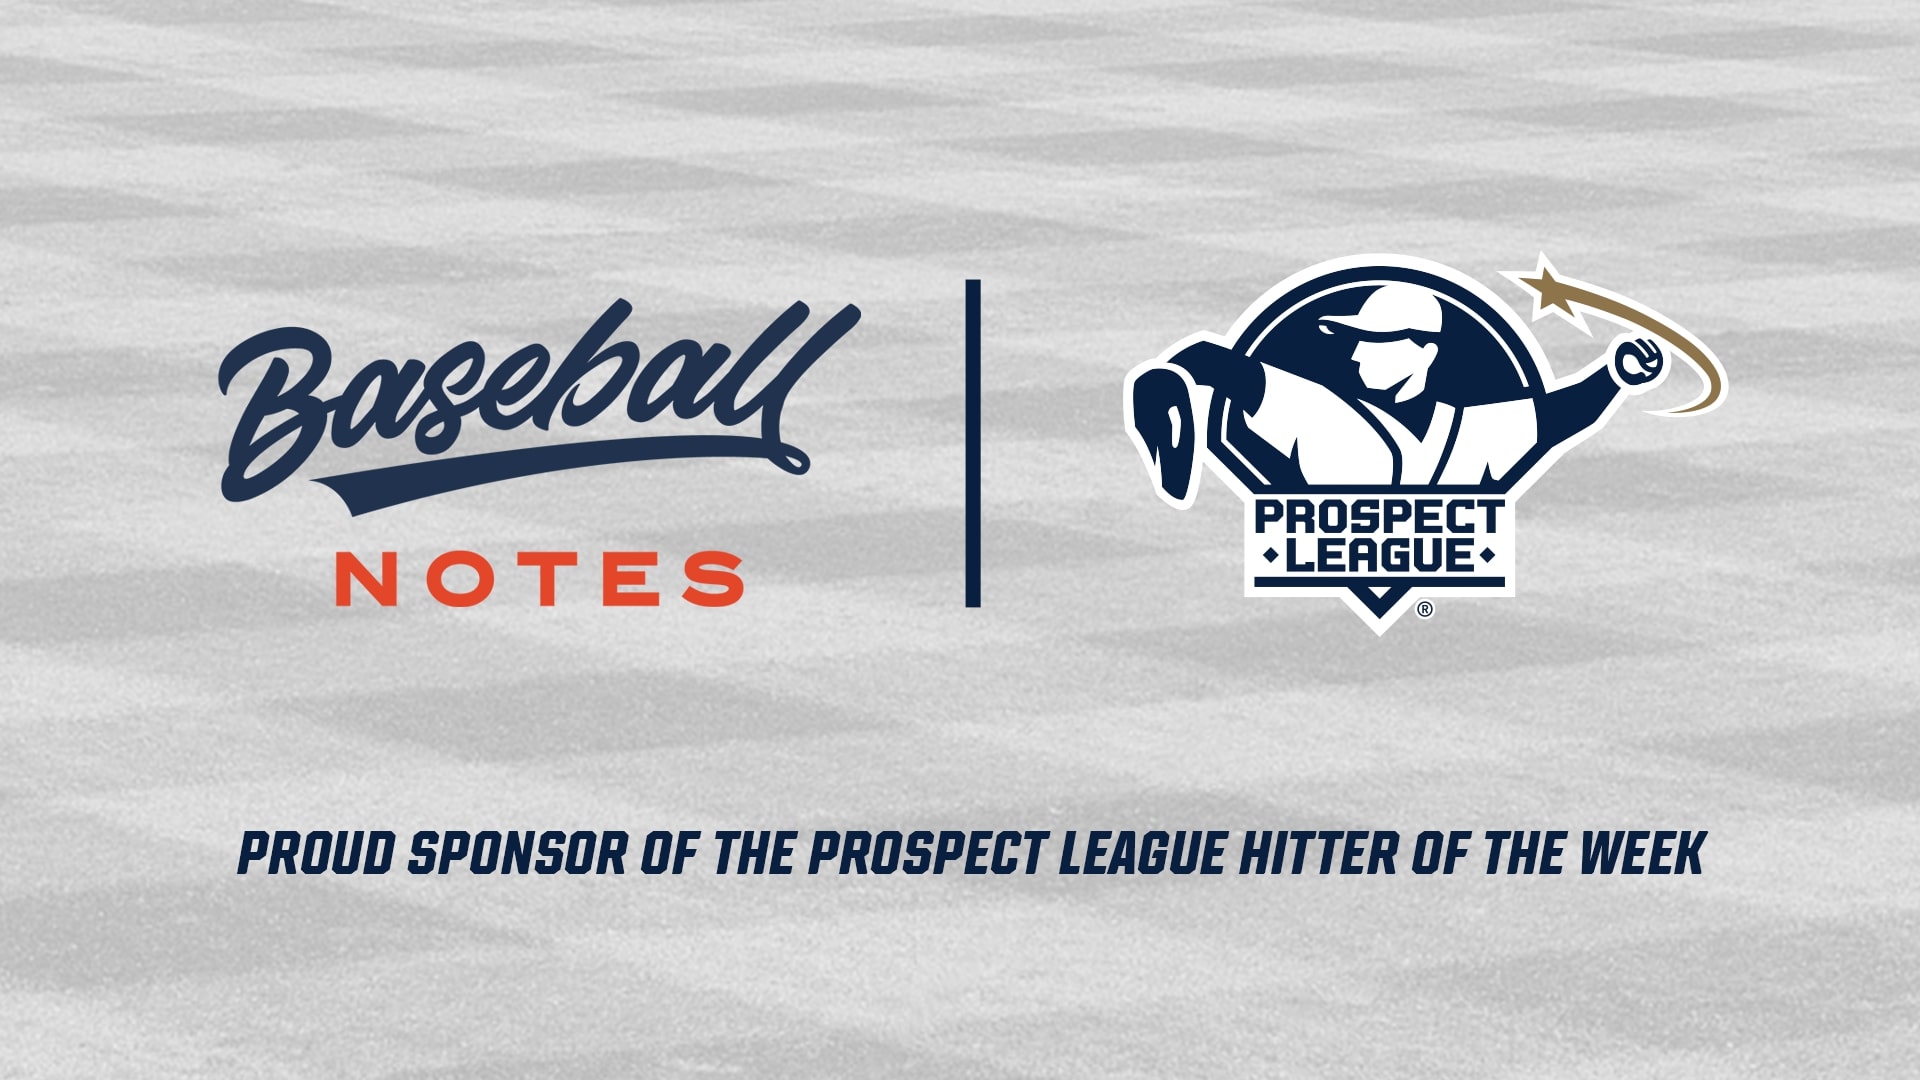 Prospect League Announces Partnership with Baseball Notes to Aid Player Training